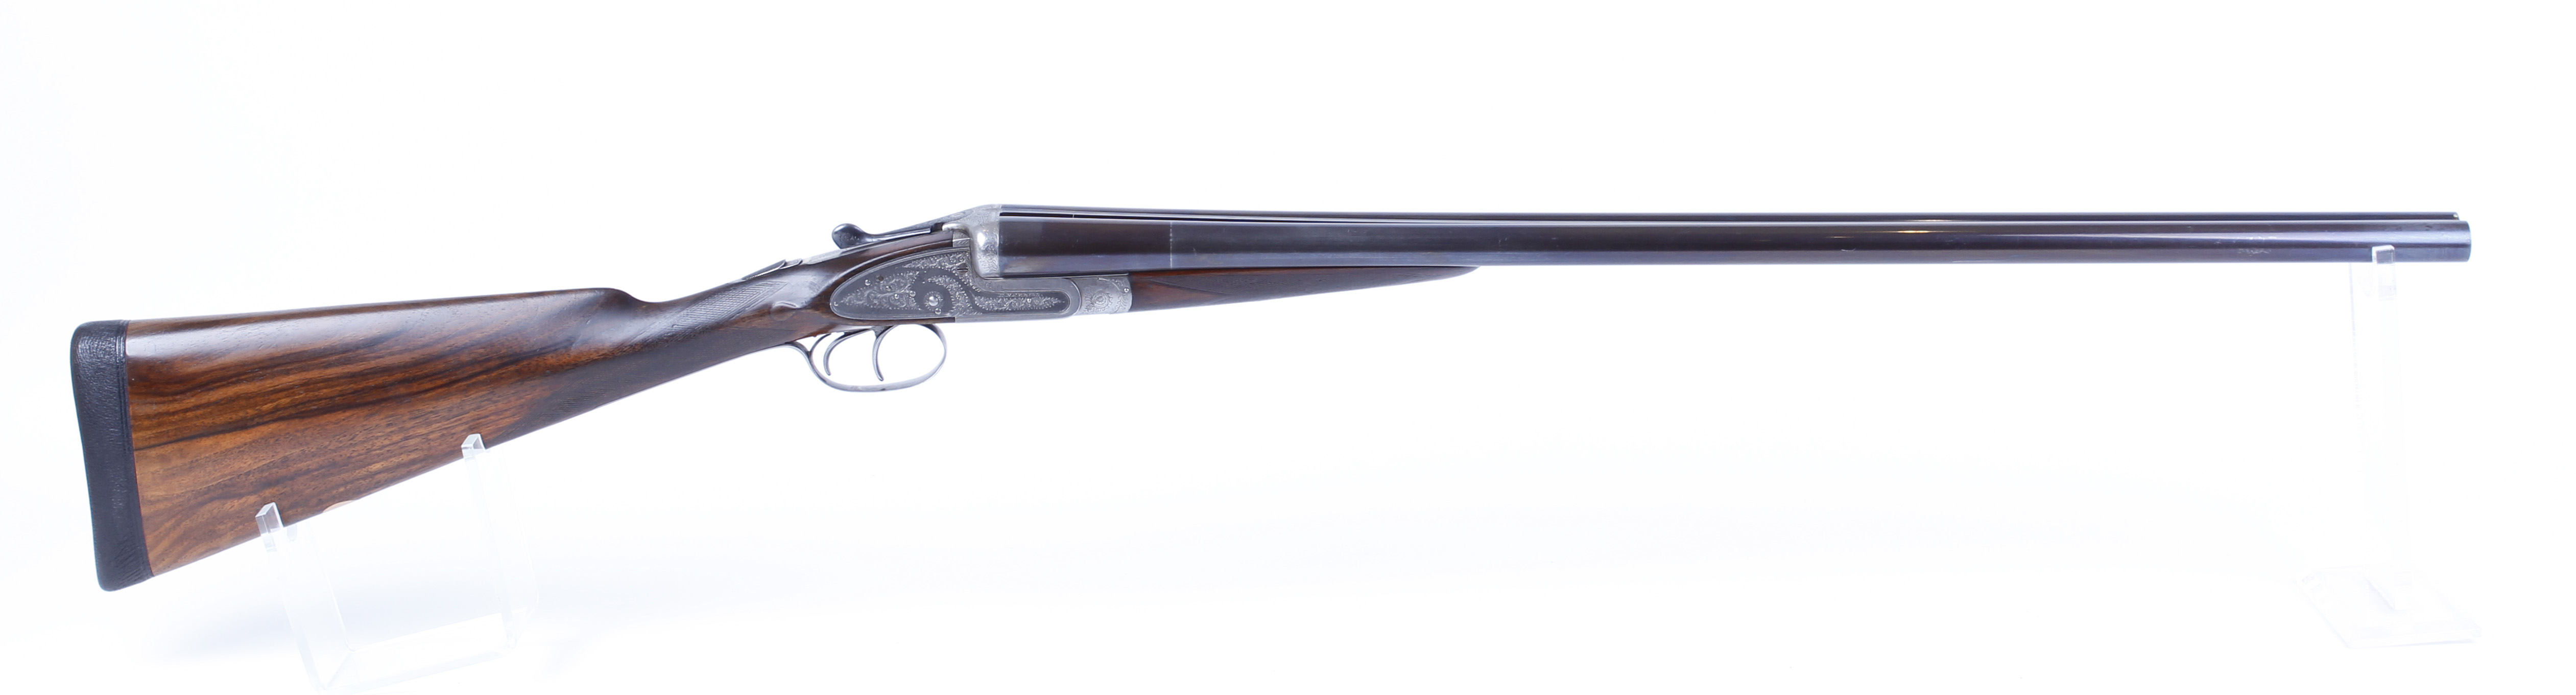 (S2) 12 bore sidelock ejector by Henry Akrill, 28 ins sleeved barrels, ¼ & ¾, concave rib with